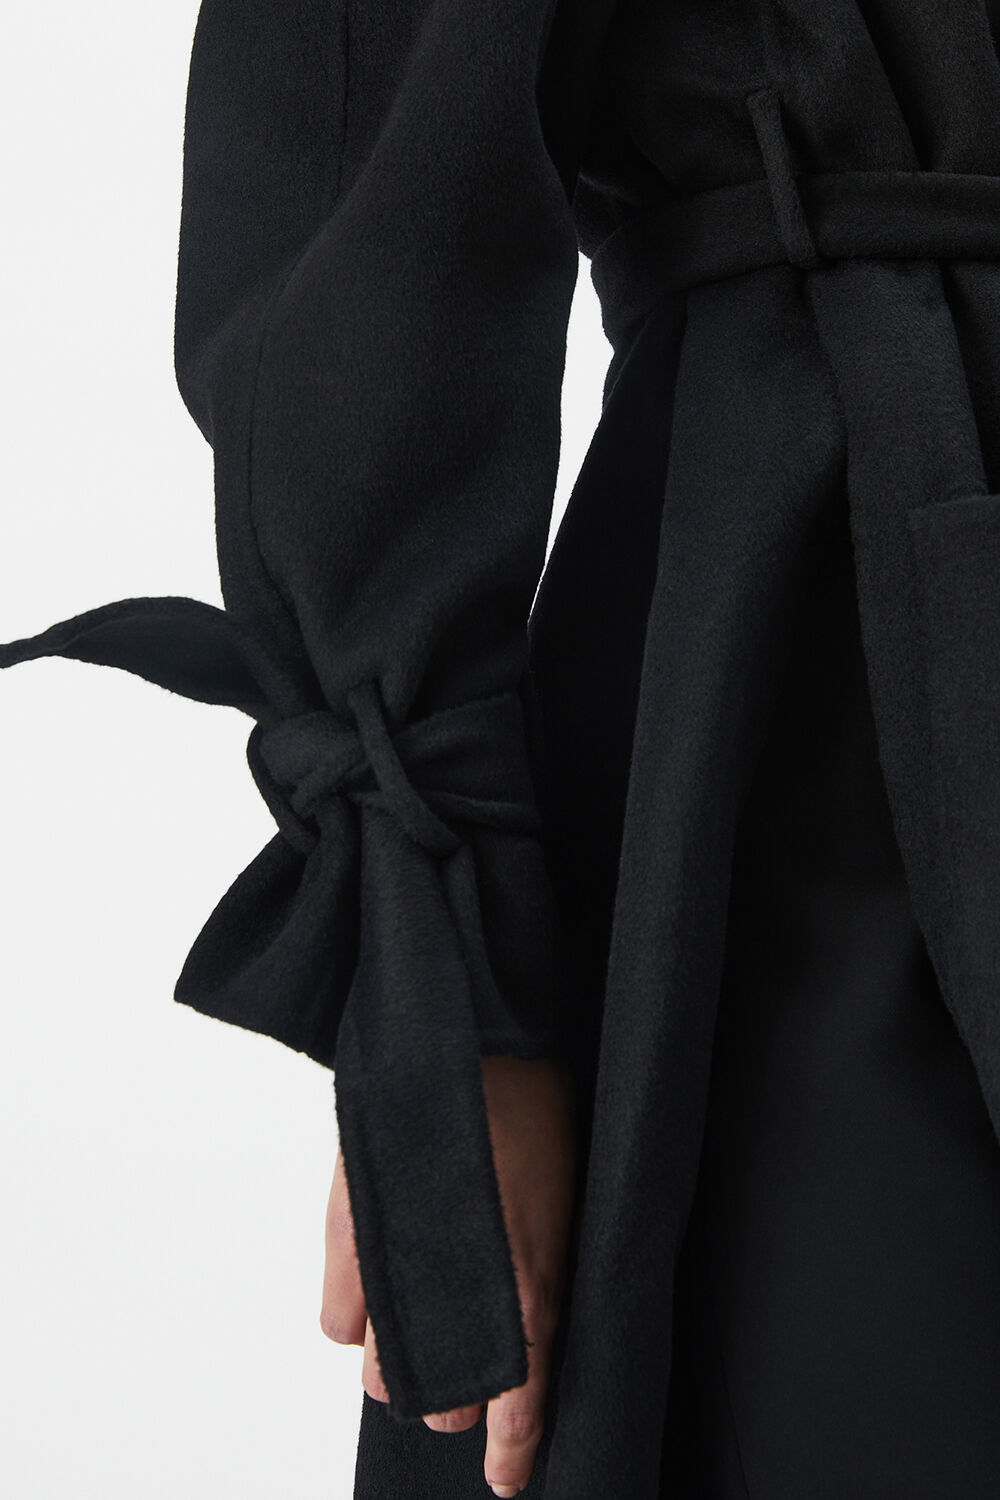 WOOL-RICH OVERSIZED TRENCH COAT in colour CAVIAR